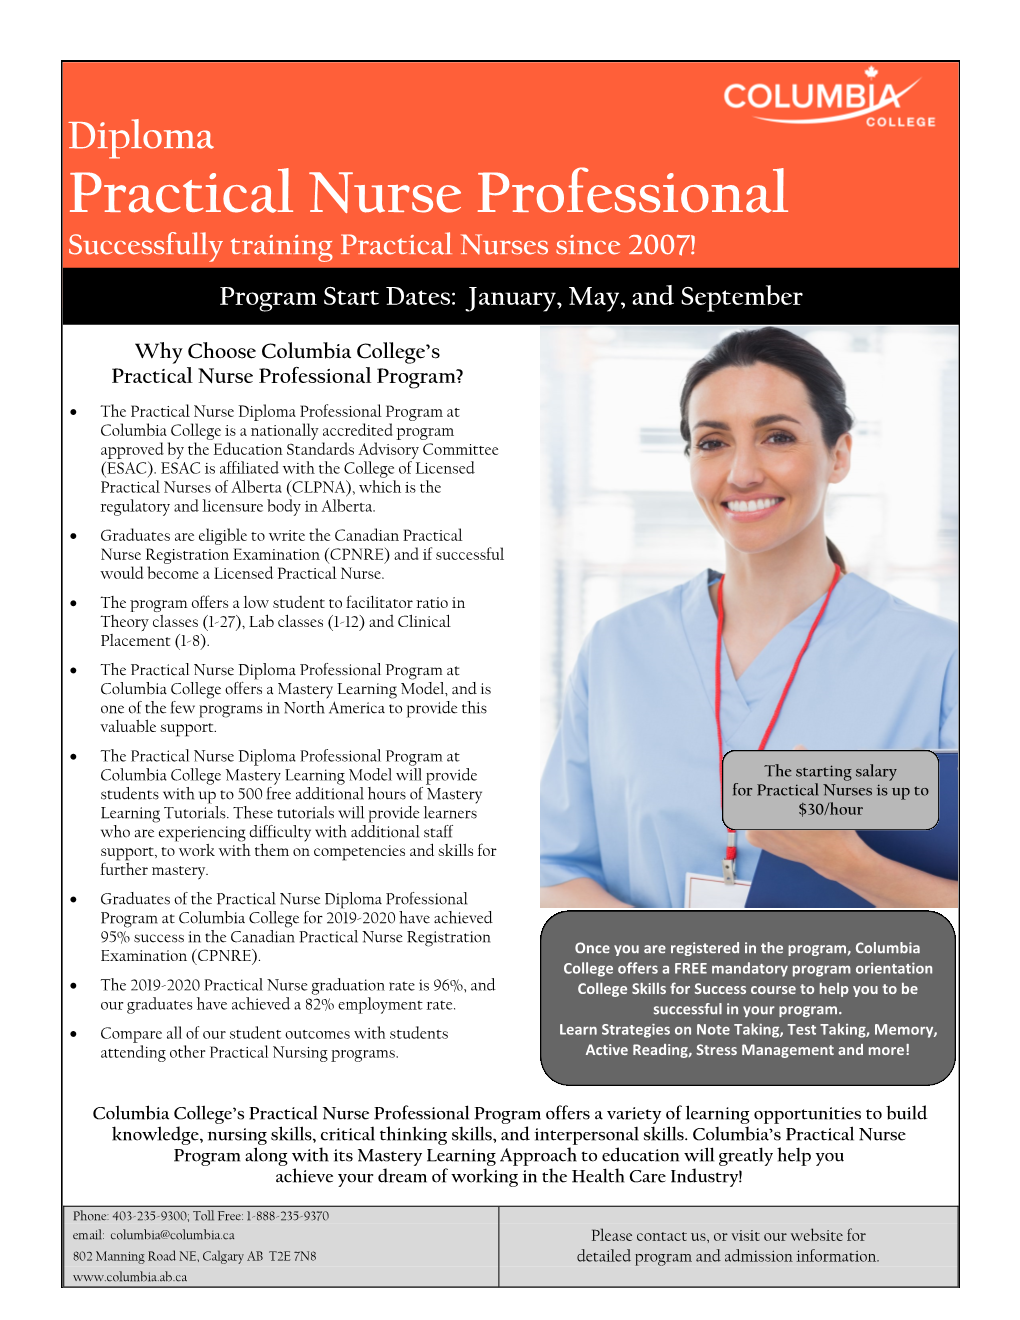 Practical Nurse Professional Successfully Training Practical Nurses Since 2007! Program Start Dates: January, May, and September